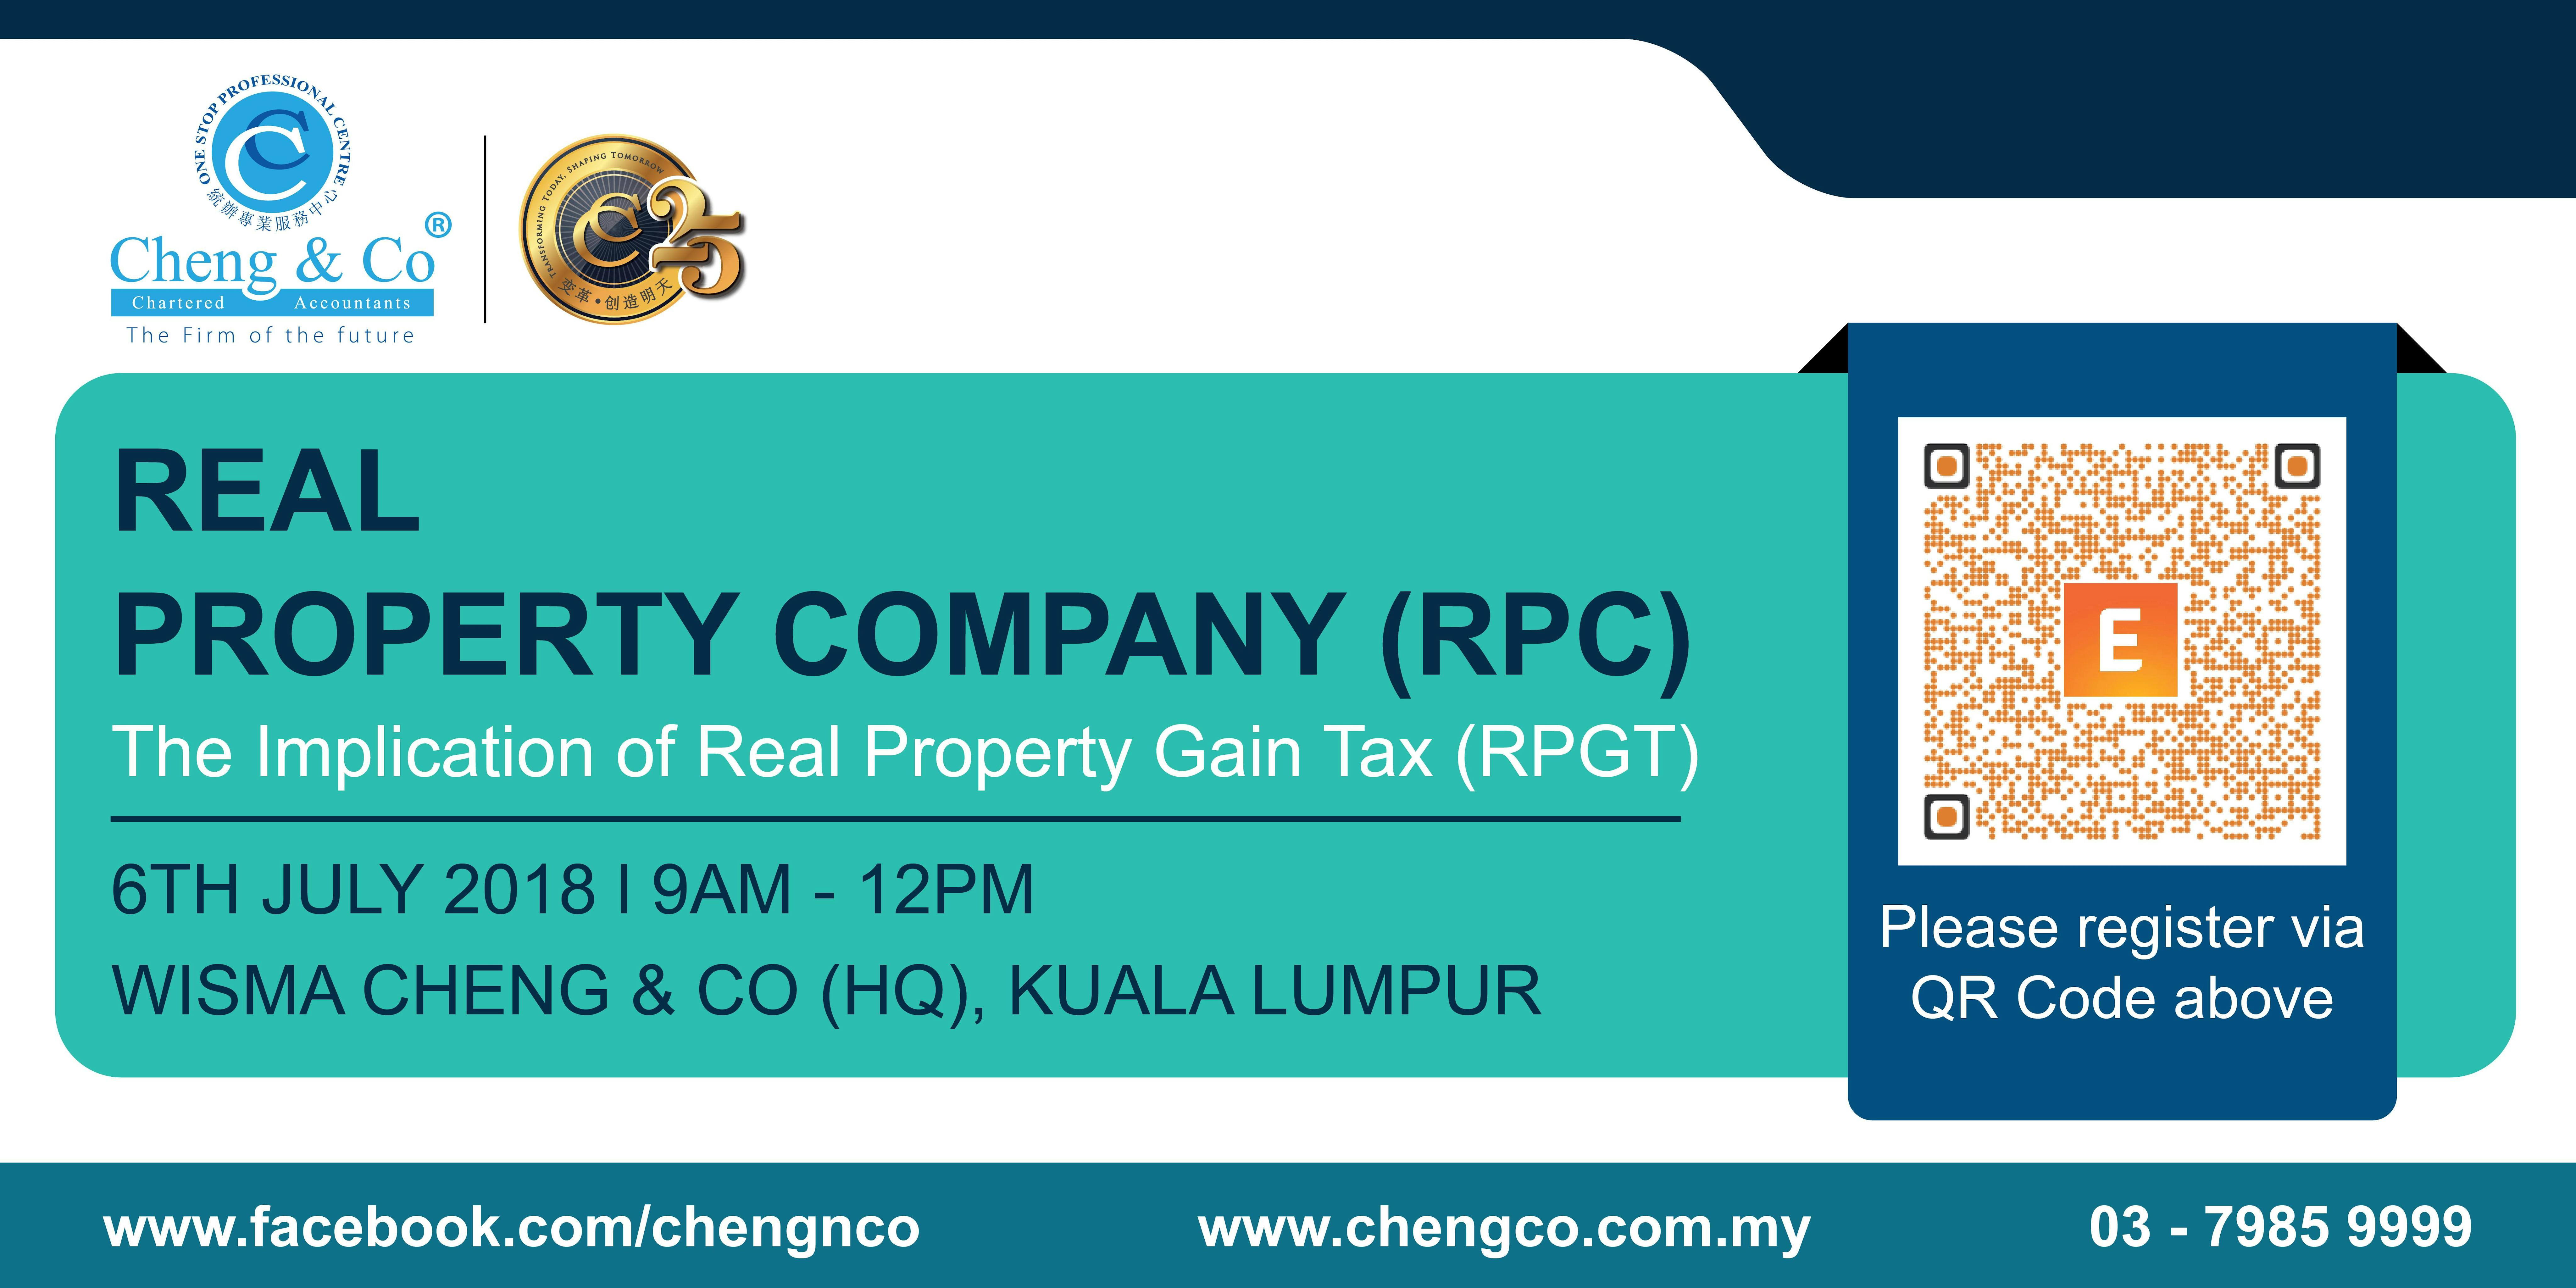 Real Property Company Rpc The Implication Of Real Property Gain Tax Rpgt 6 Jul 2018